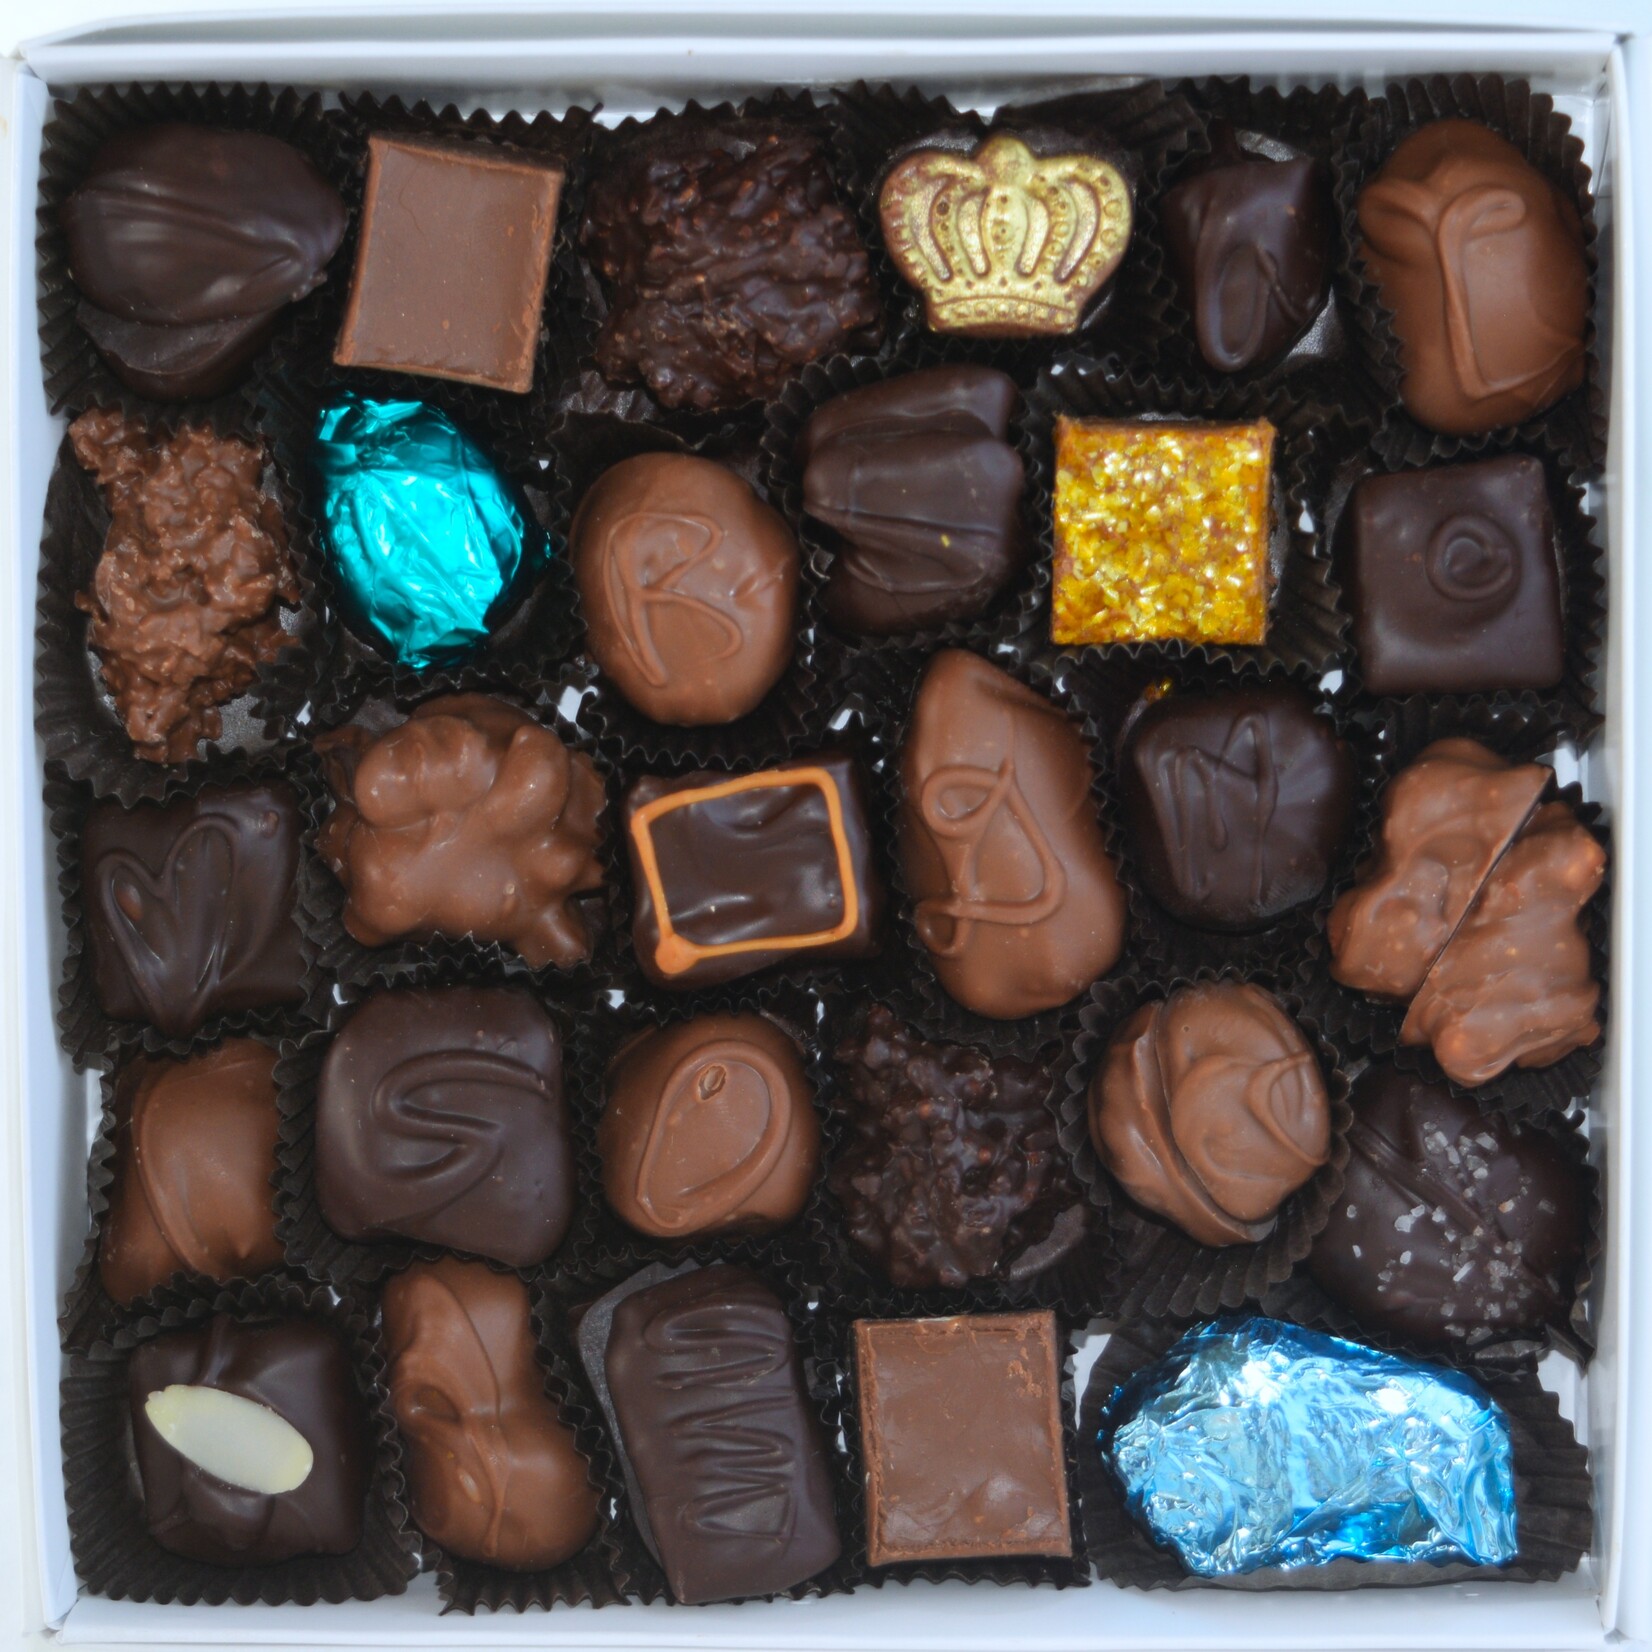 One Pound Deluxe Chocolate Assortment